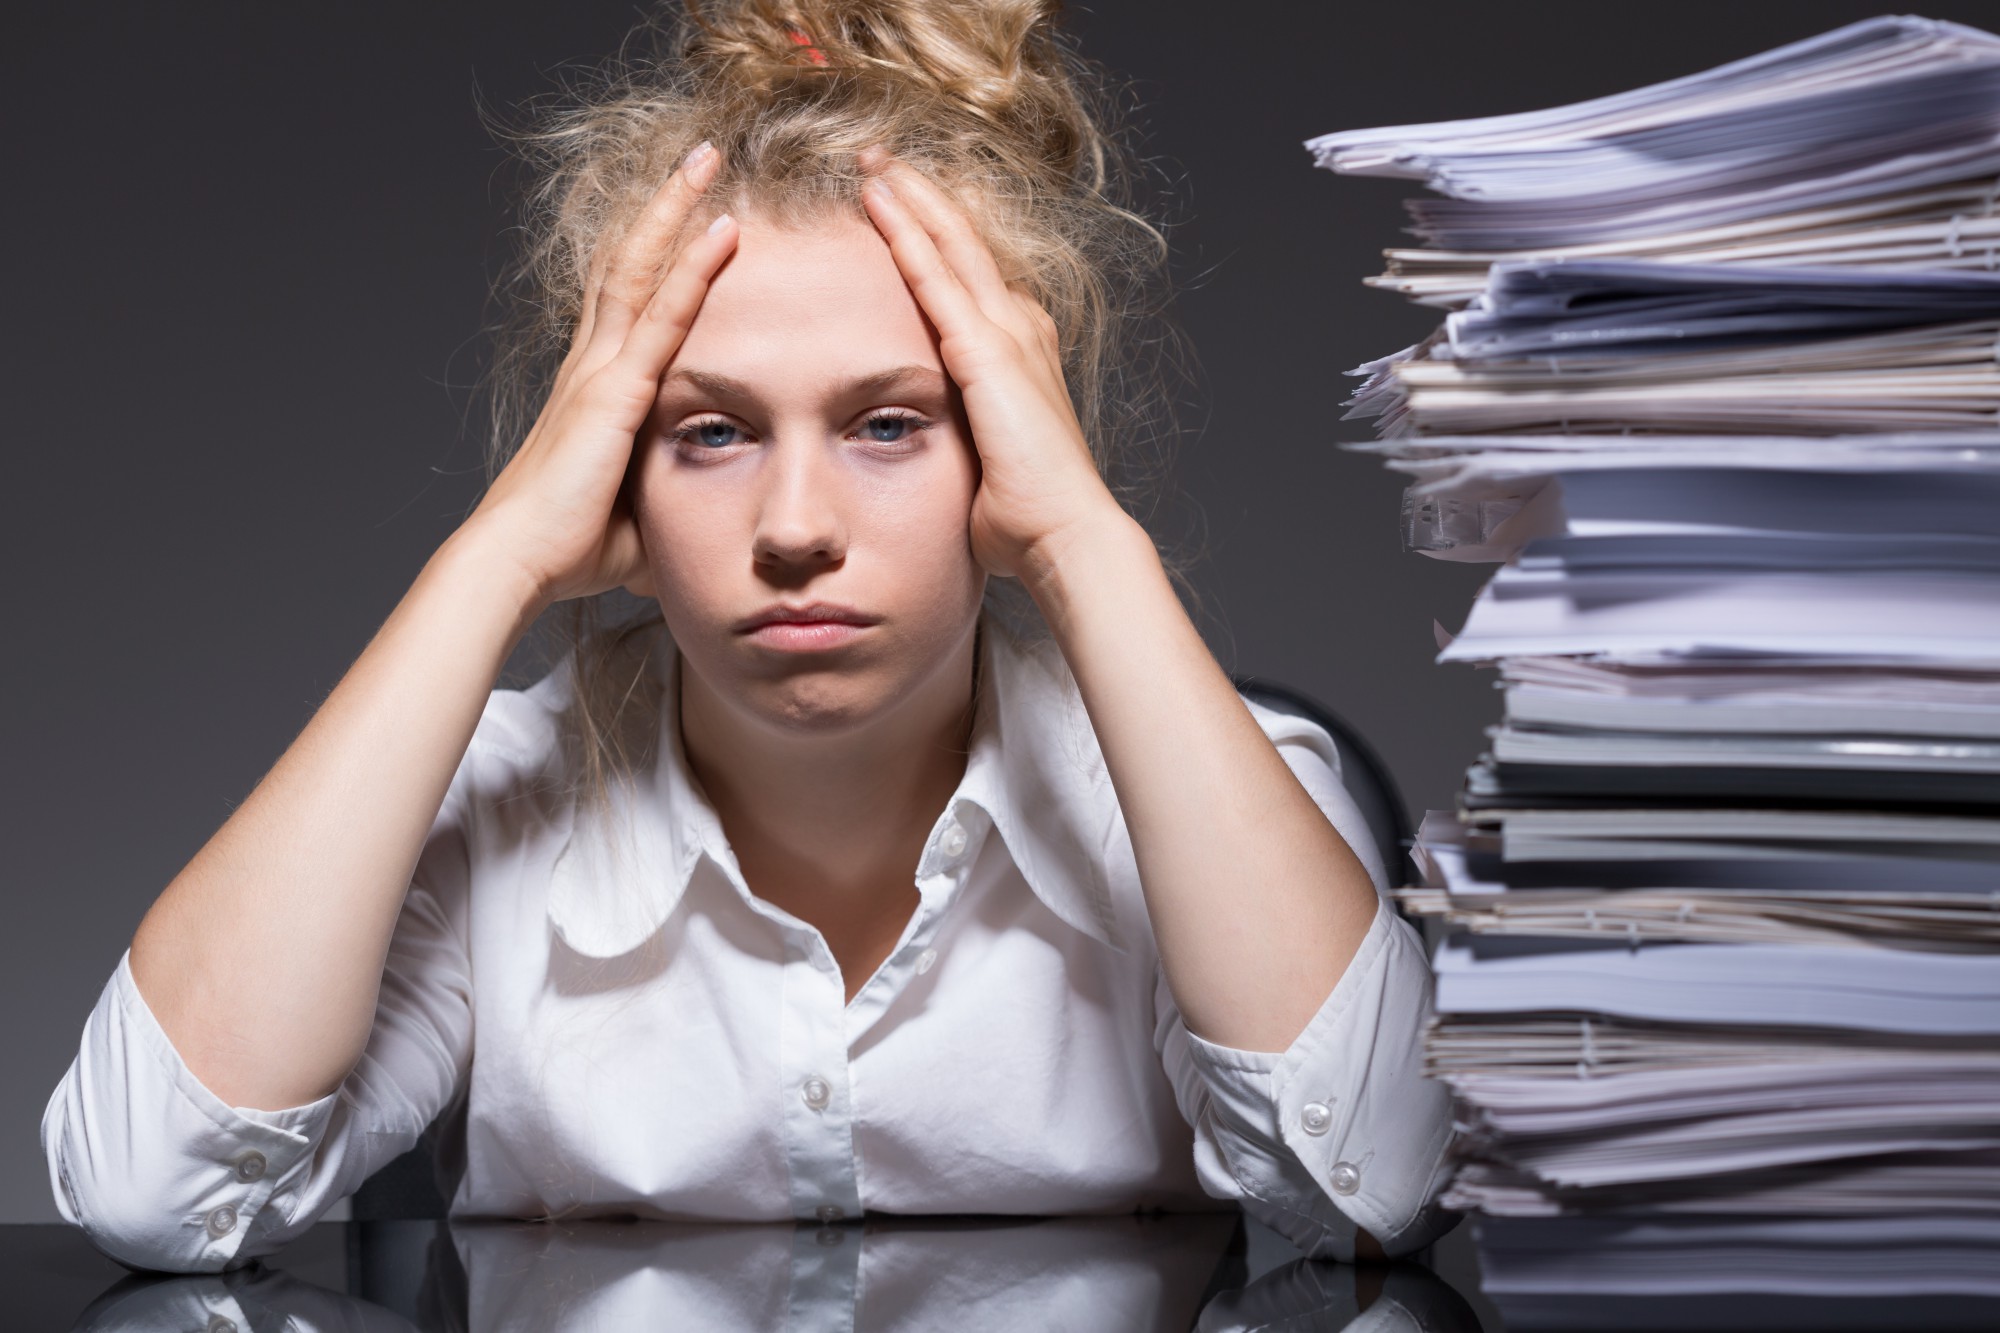 Stress & Burnout In The Workplace